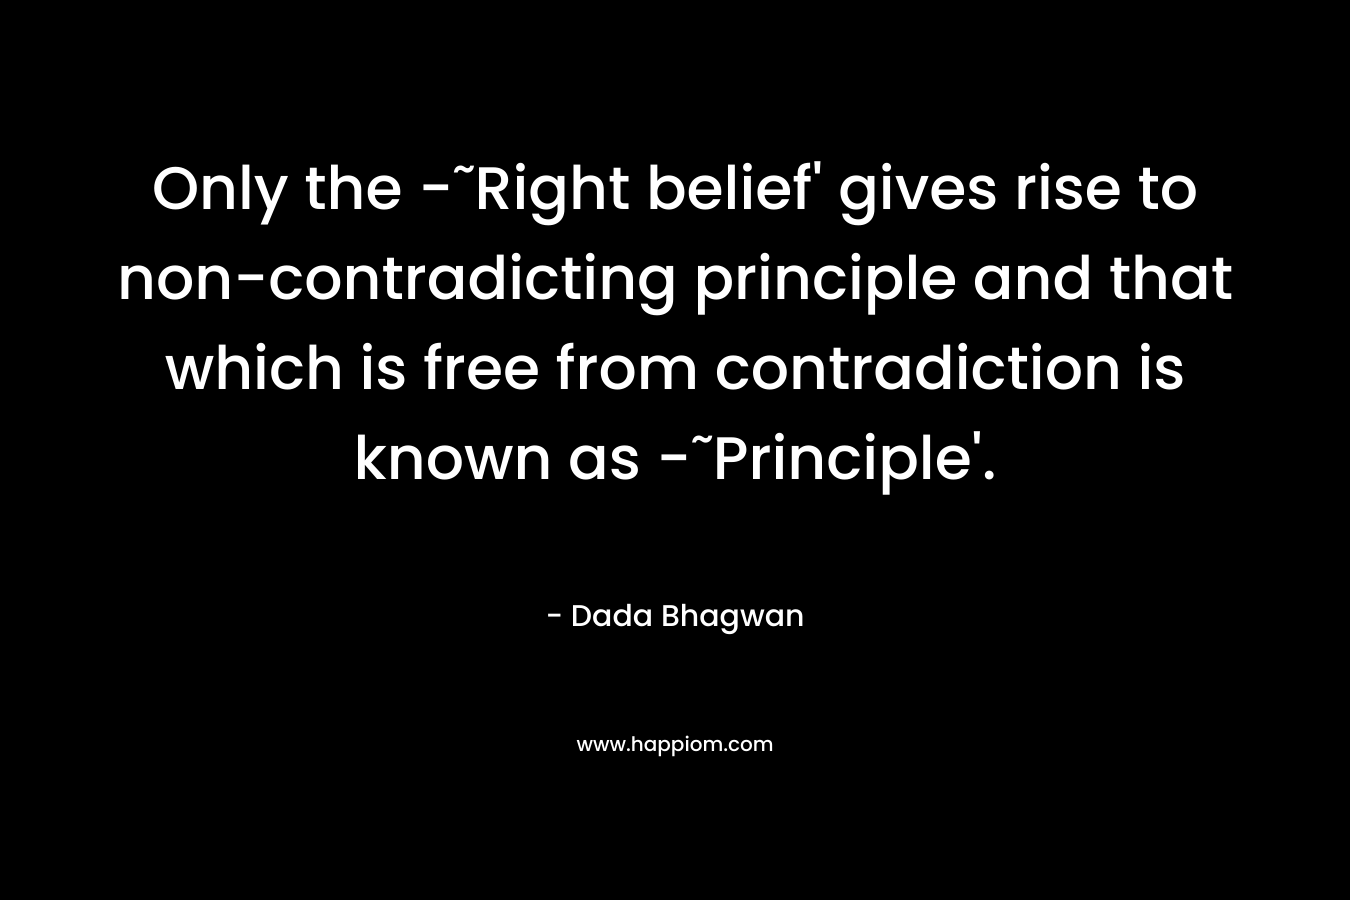 Only the -˜Right belief' gives rise to non-contradicting principle and that which is free from contradiction is known as -˜Principle'.